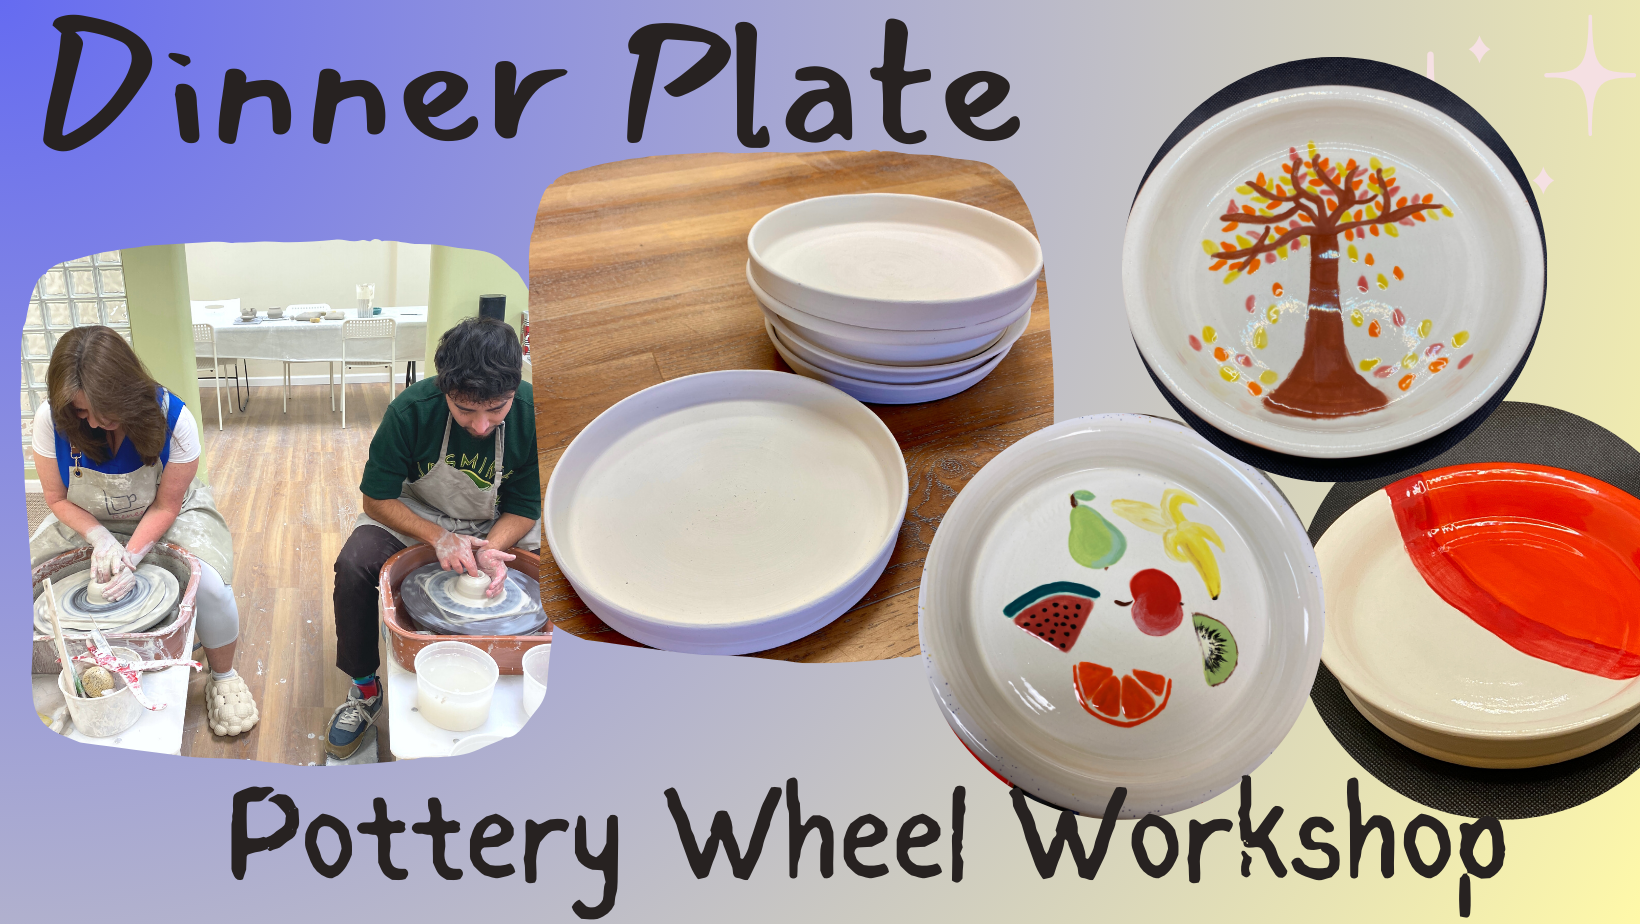 The Easiest Way to Make Plates! // How to make ceramic plates